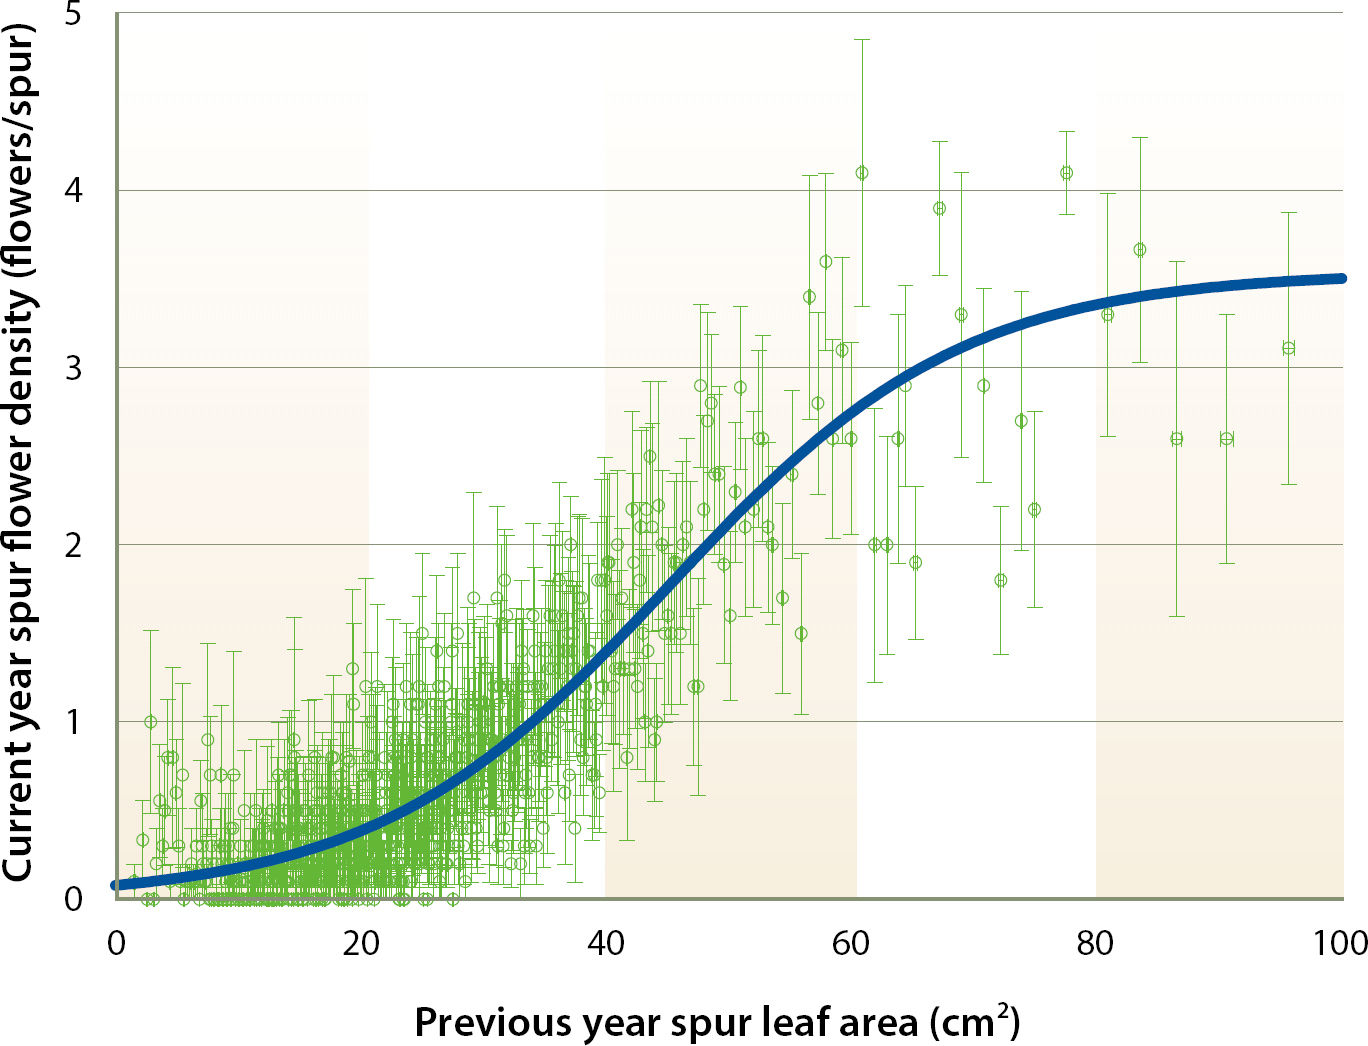 Relationship between current year spur flower density and previous year spur leaf area on tagged spurs from 2002 to 2007 (R2 = 0.76, P < 0.0001). Each point is the mean of 10 spurs ± SE.